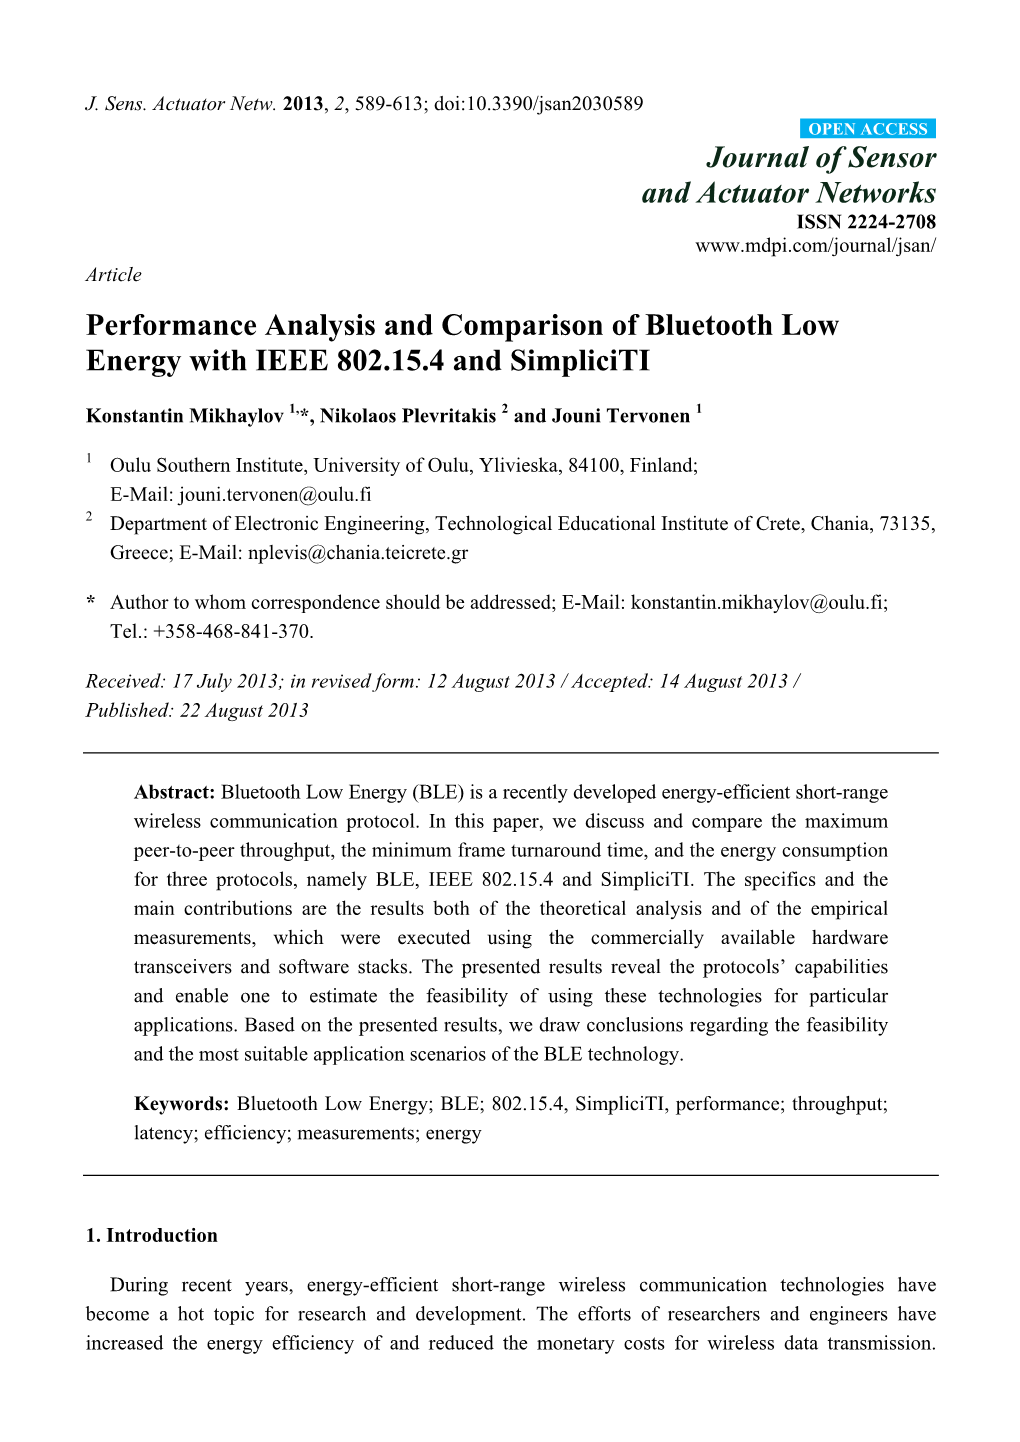 Performance Analysis and Comparison of Bluetooth Low Energy with IEEE 802.15.4 and Simpliciti